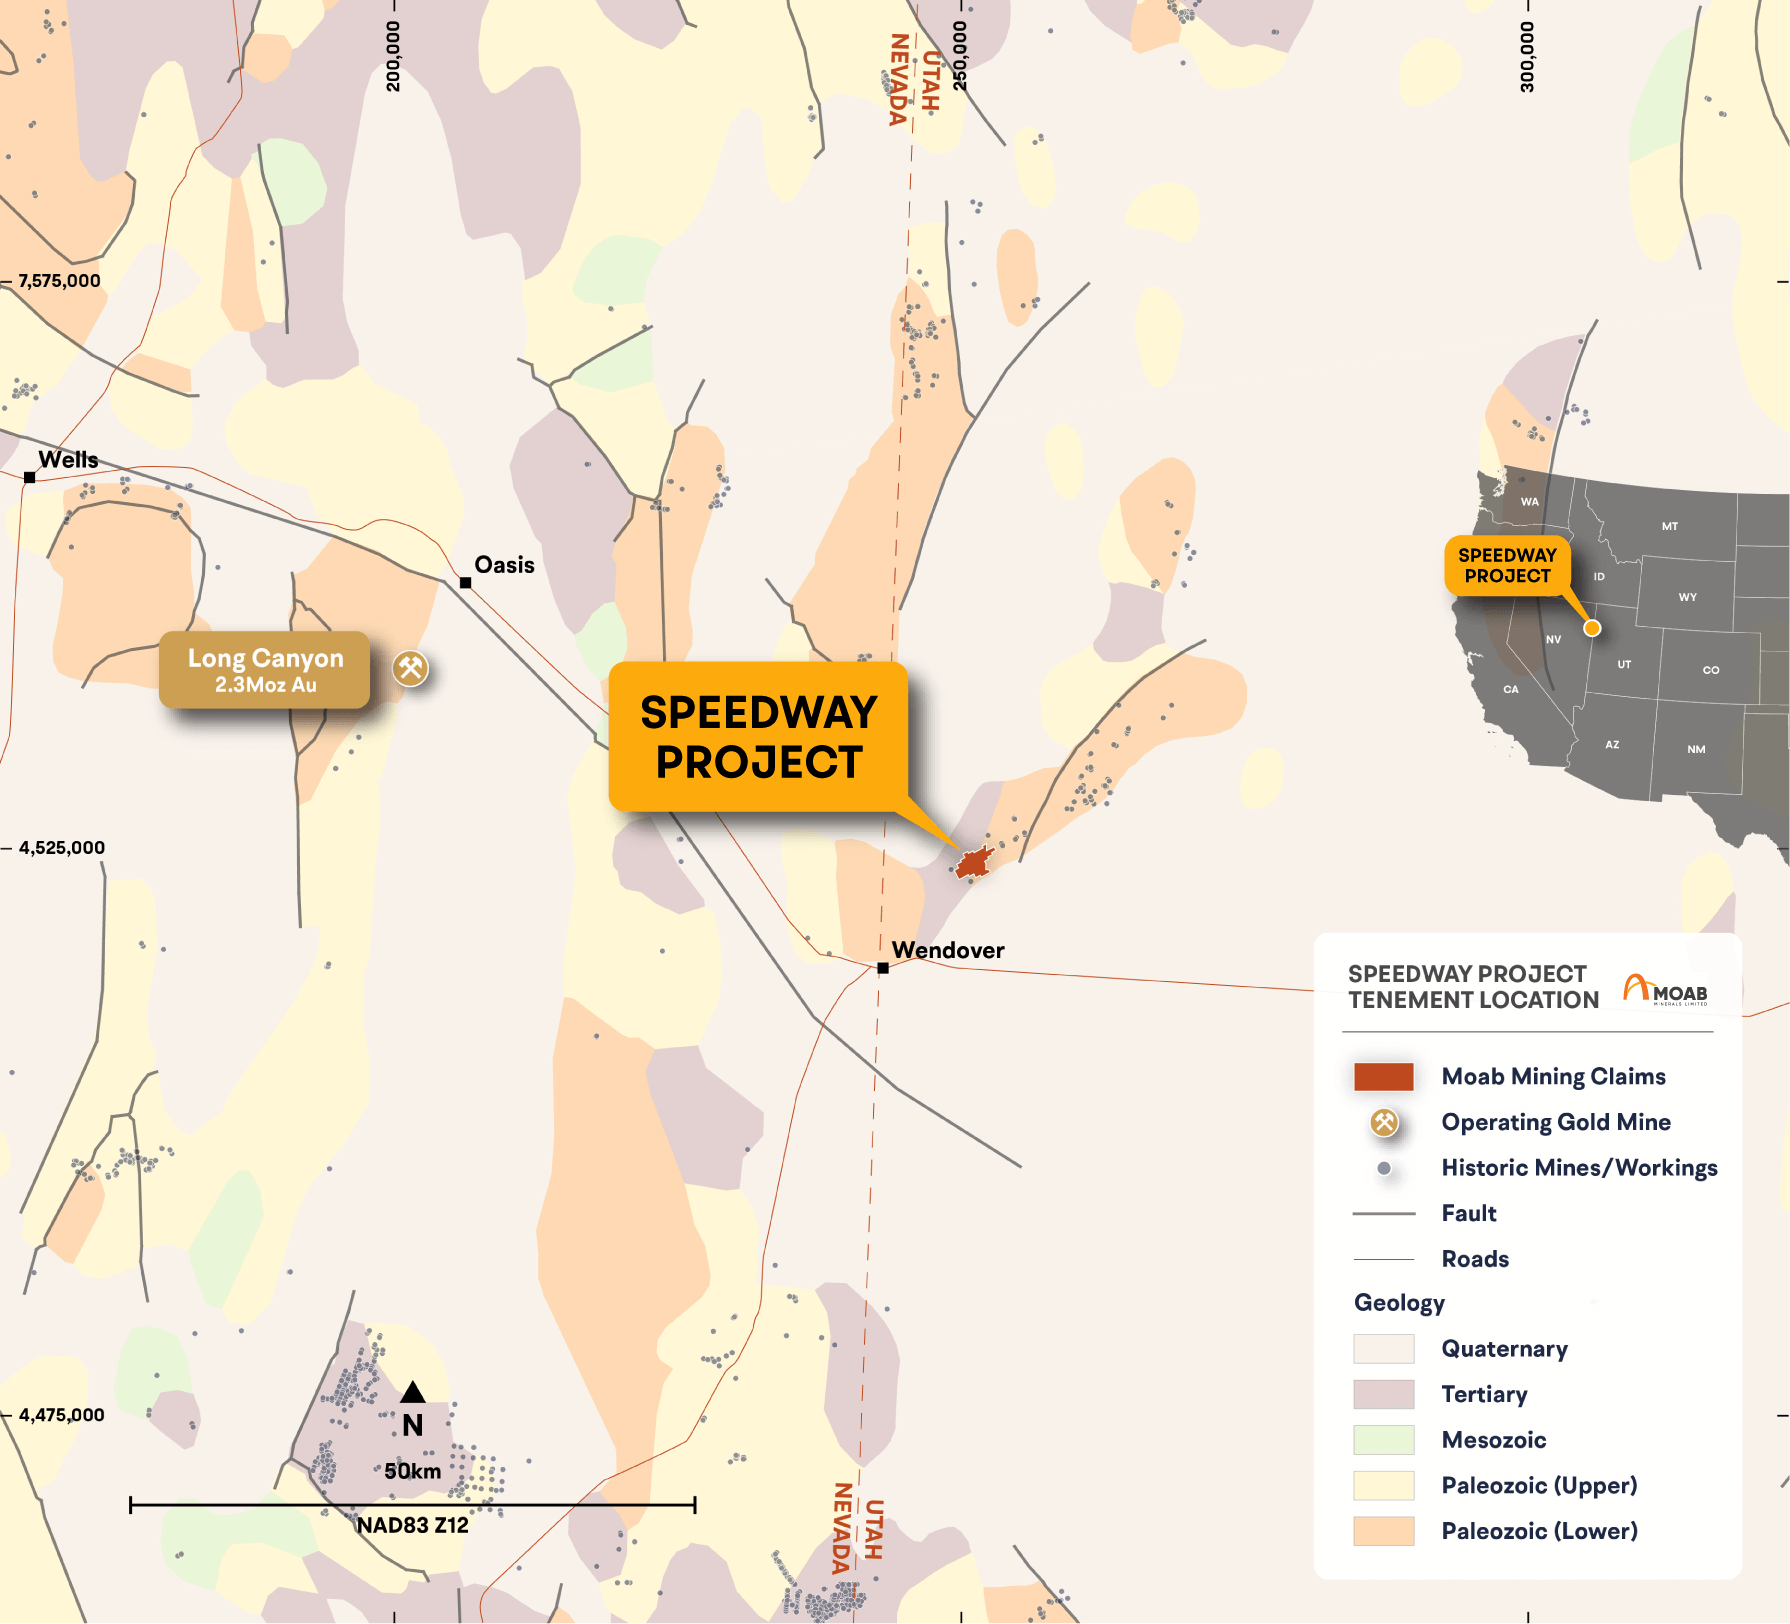 Speedway project location mapmap